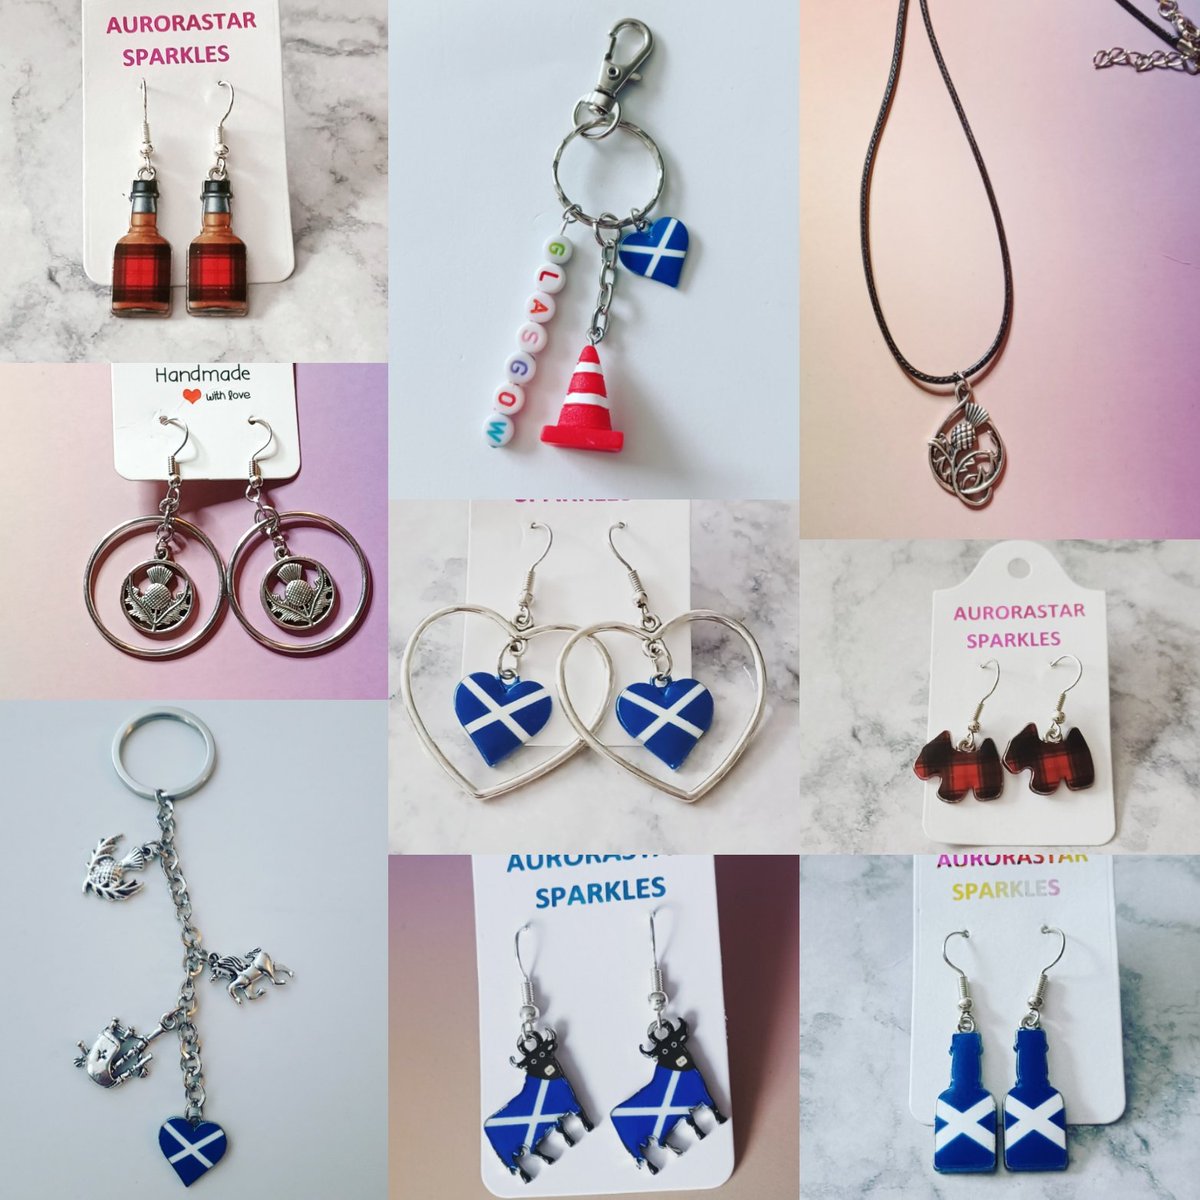 I love making #Scottish themed jewellery 🏴󠁧󠁢󠁳󠁣󠁴󠁿💖 hope you have some for anyone attending a #BurnsSupper tonight 😊

#BurnsNight #MHHSBD #shopindie #earlybiz #jewellery #craftbizparty #scottishcrafthour #UKmakers